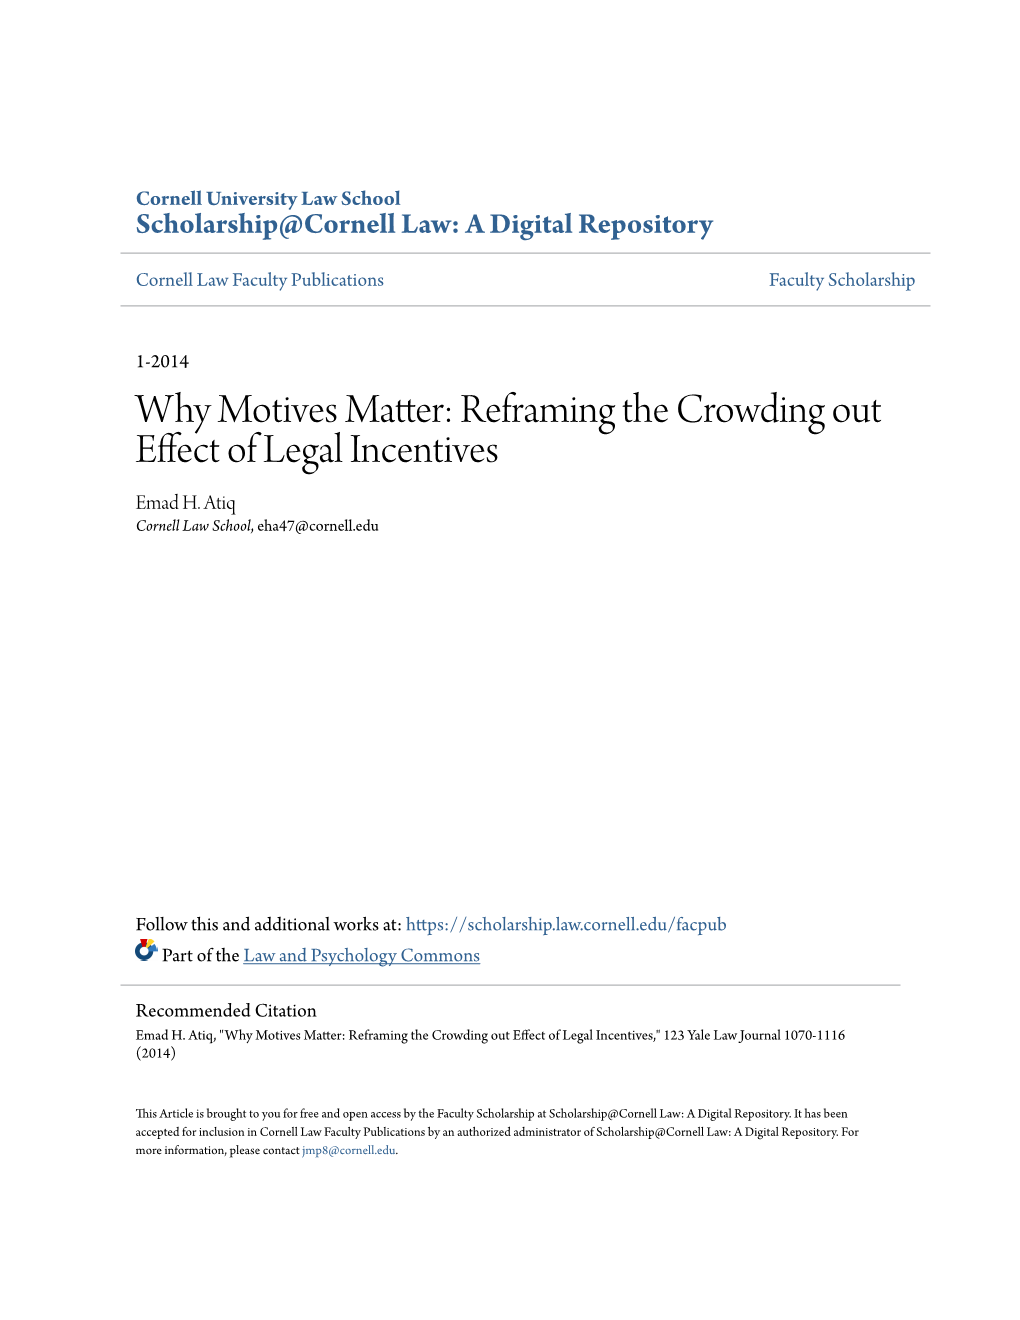 Reframing the Crowding out Effect of Legal Incentives Emad H